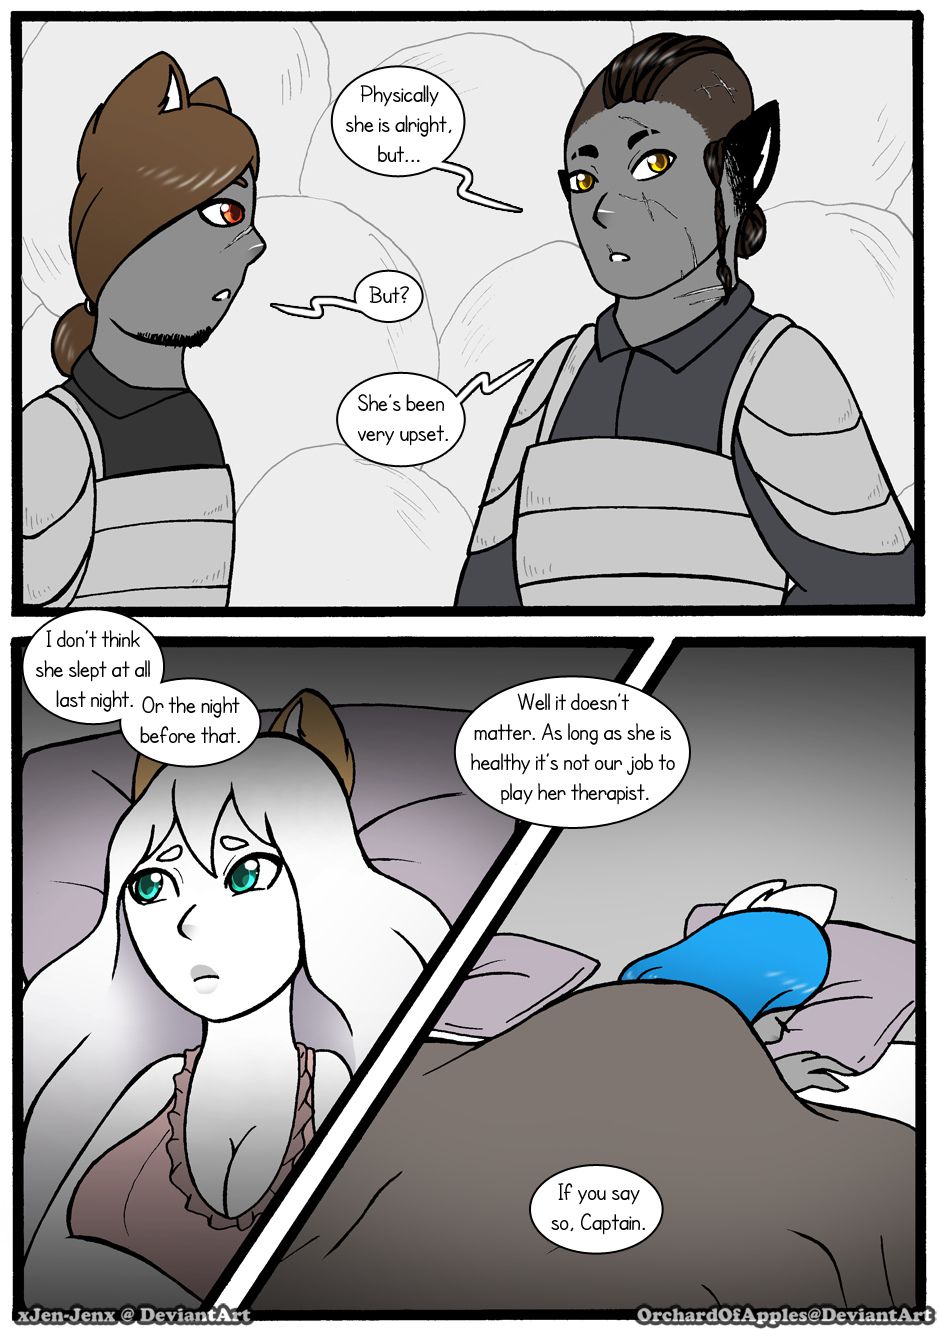 [Jeny-jen94] Between Kings and Queens [Ongoing] 229